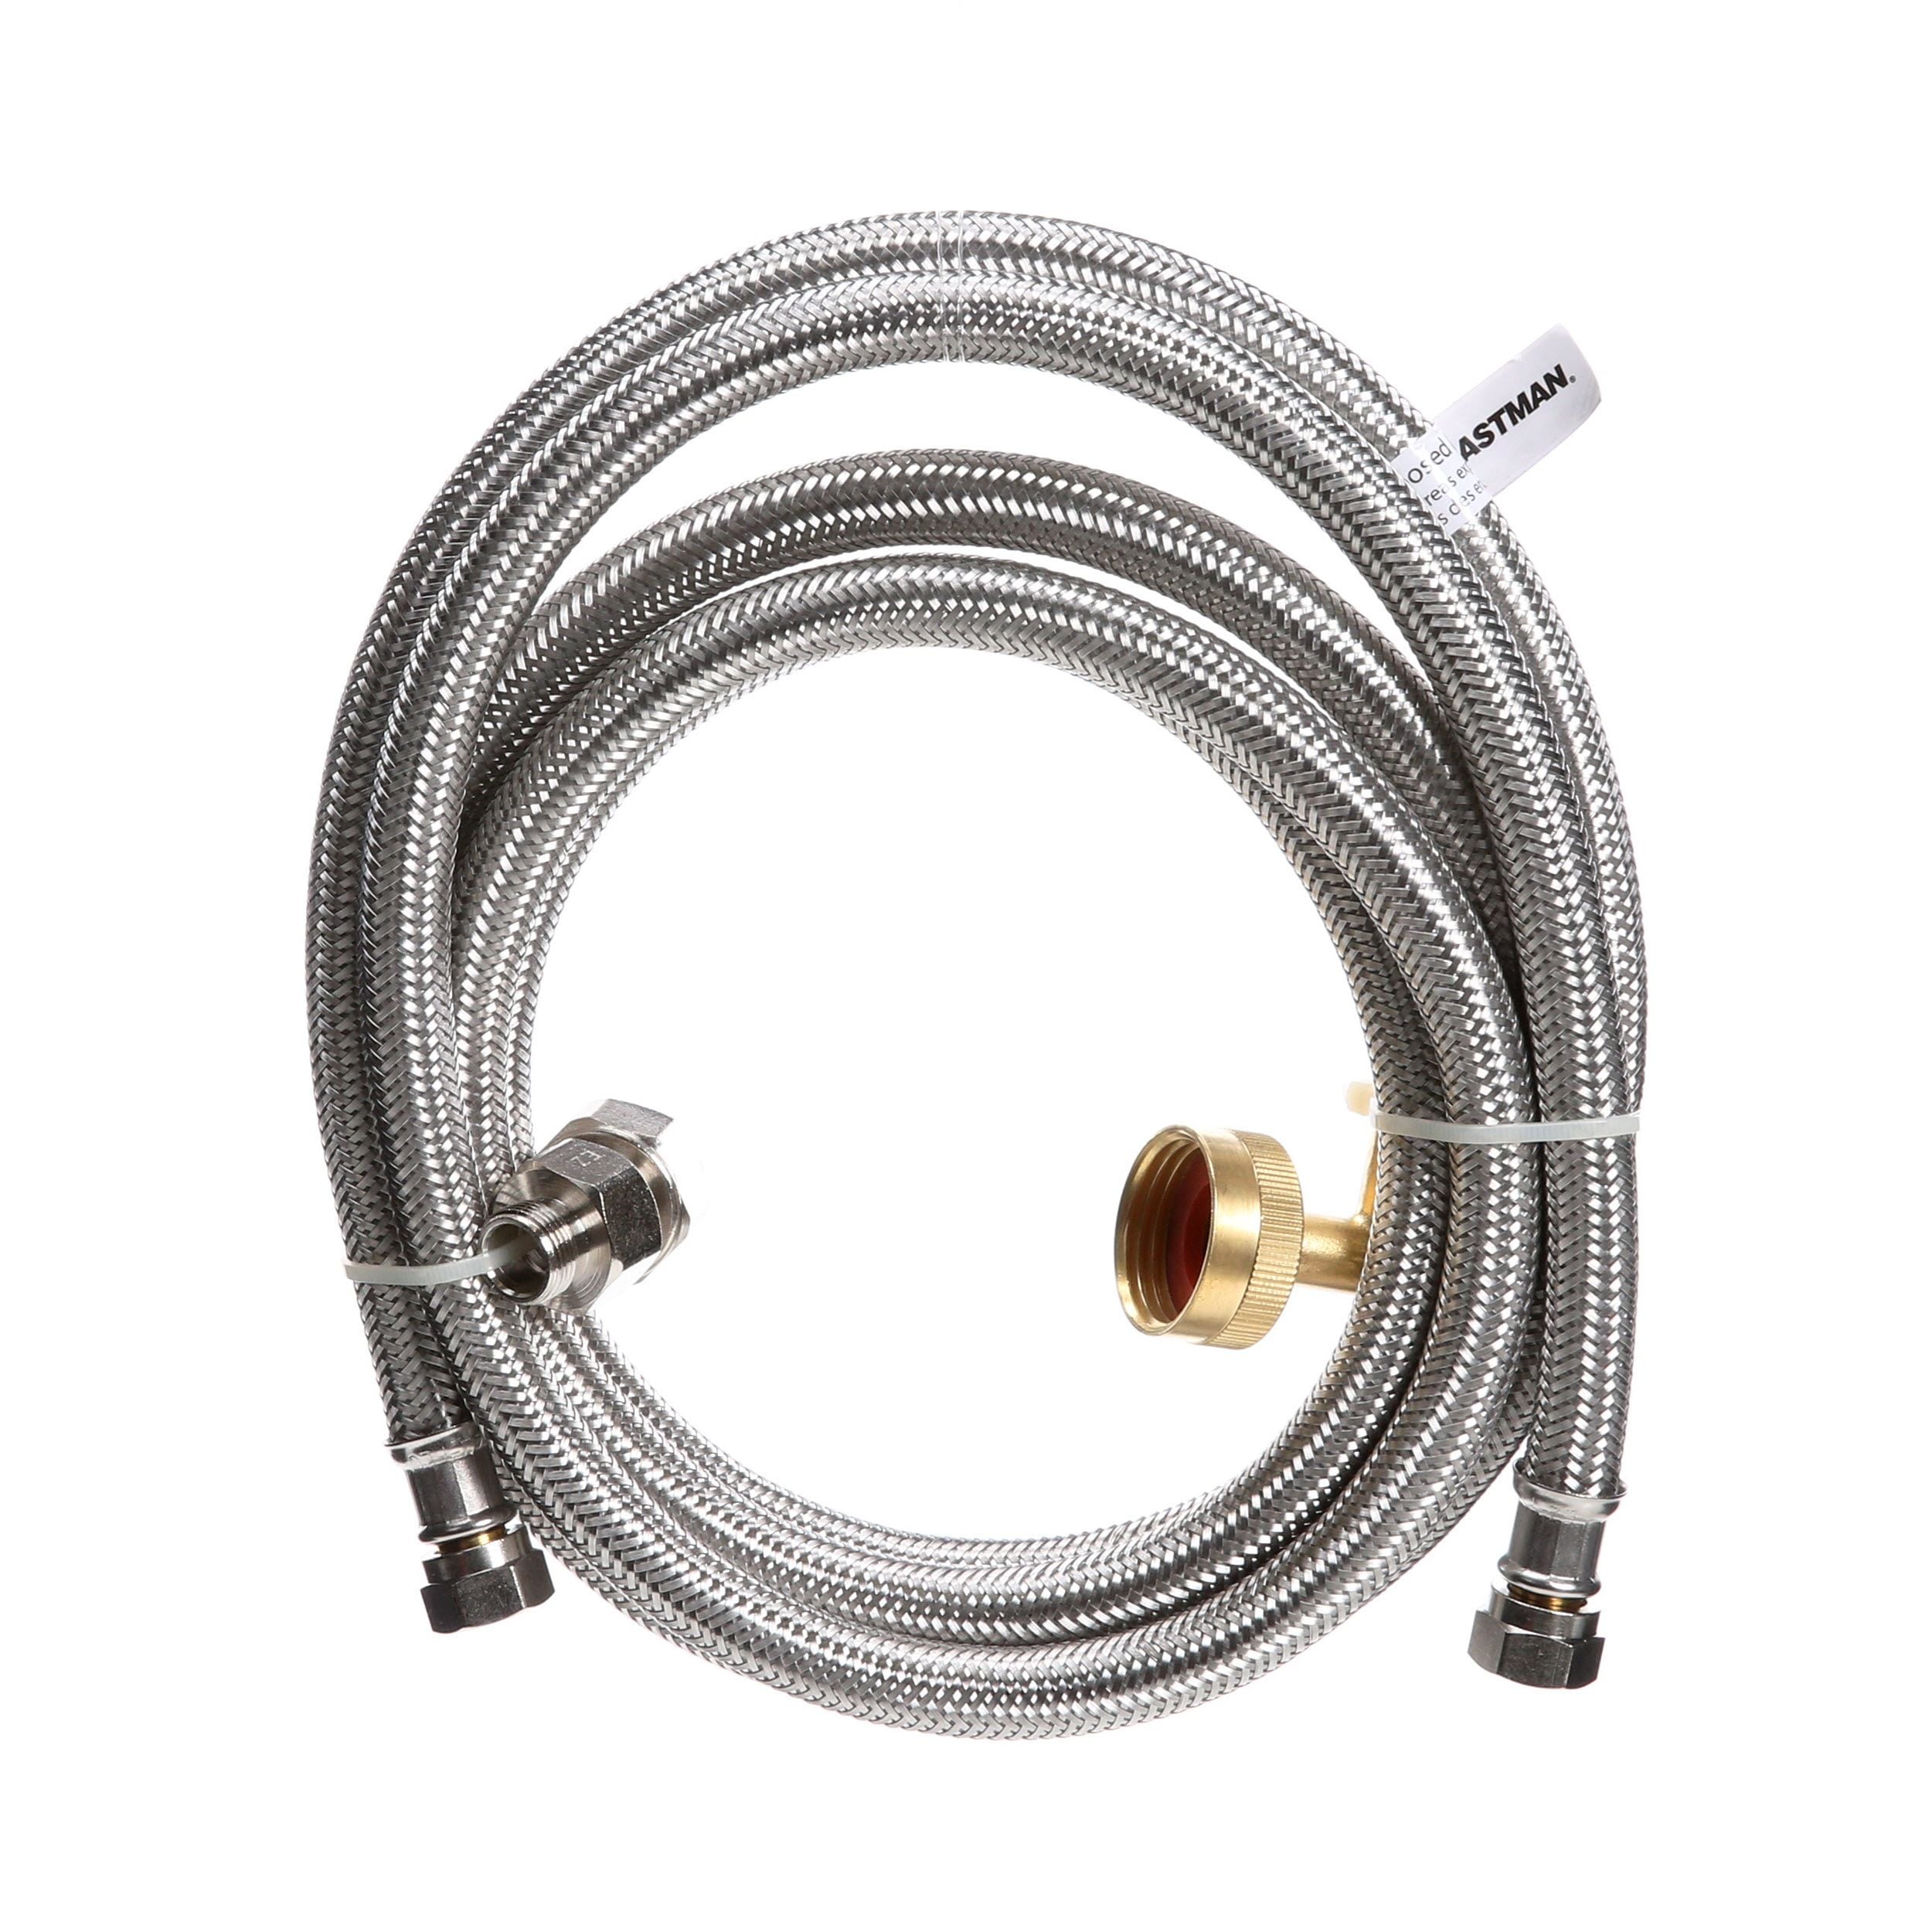 New Eastman 8-ft 1500-PSI Stainless Steel Dishwasher Connector Water Supply Kit 